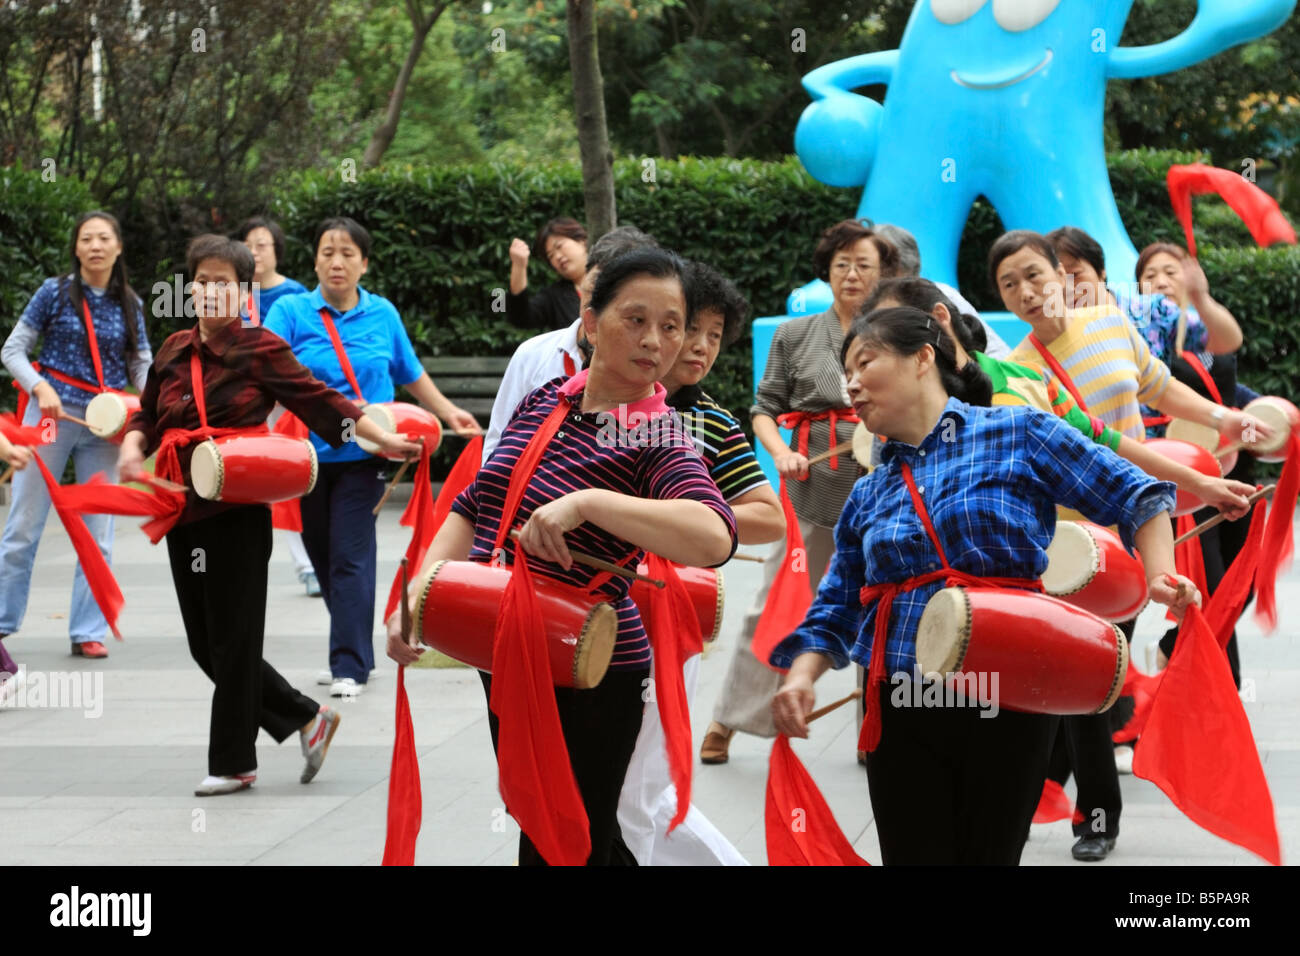 Traditional waist drum dance a part of fitness class for women in Shanghai China with blue World Expo logo in background Stock Photo